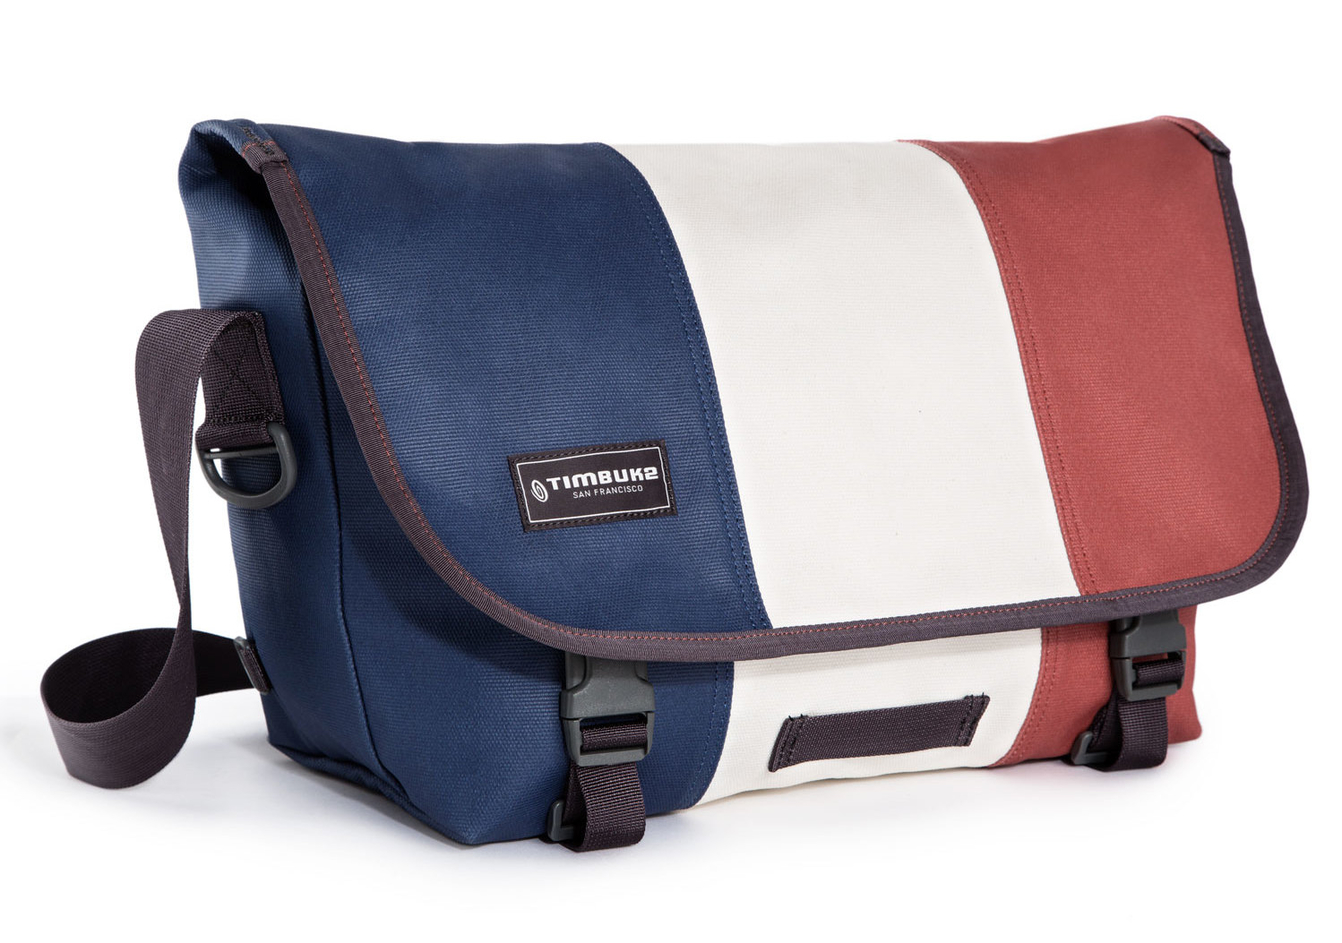 My Timbuk2 Classic Messenger Bag made my commute simple